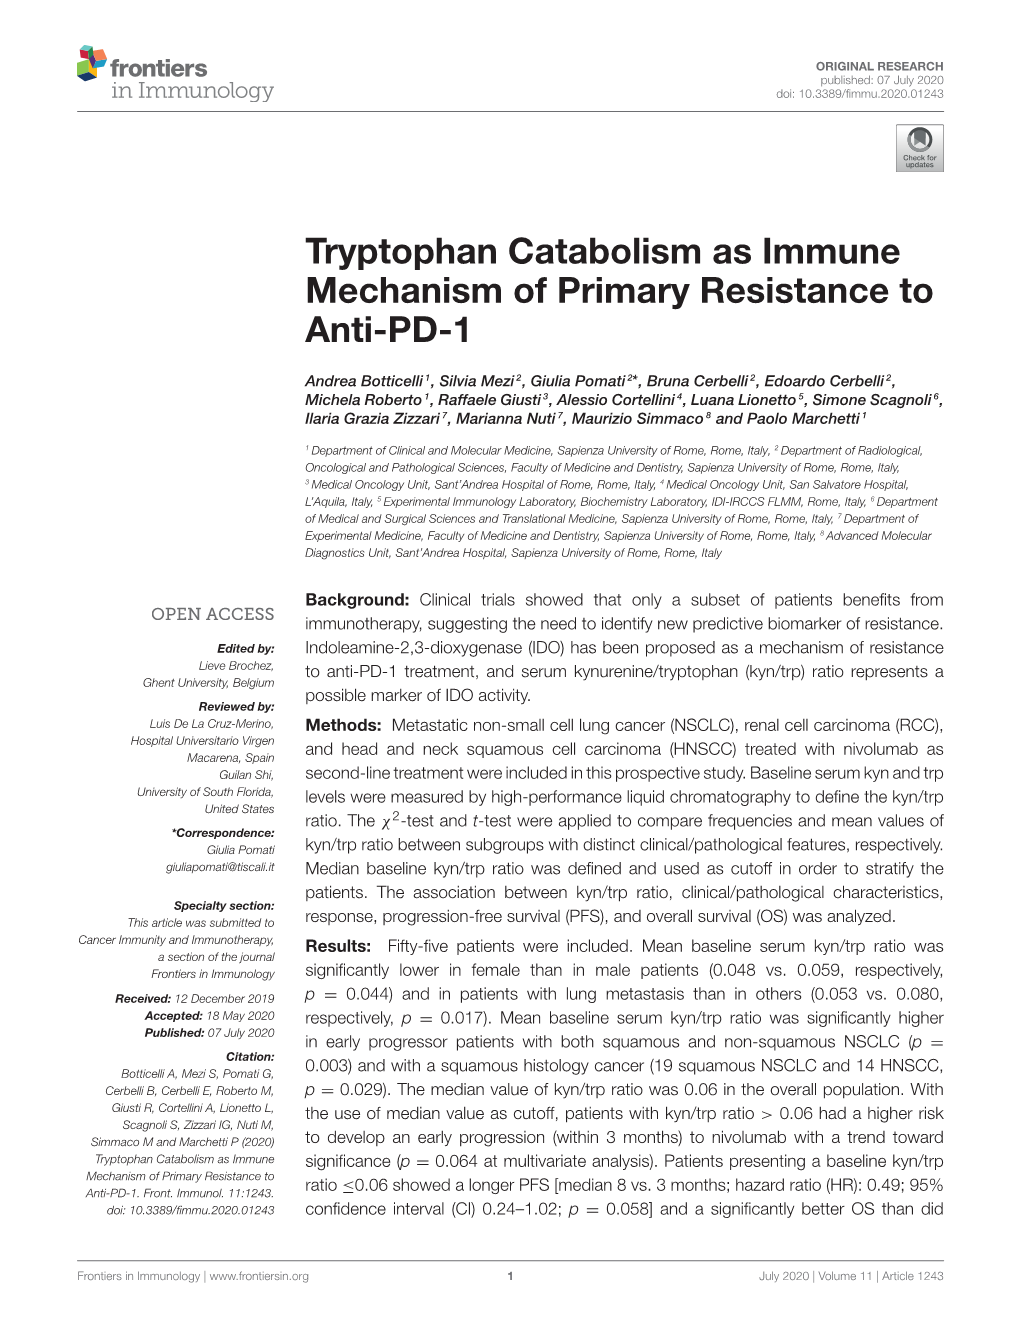 Tryptophan Catabolism As Immune Mechanism of Primary Resistance to Anti-PD-1